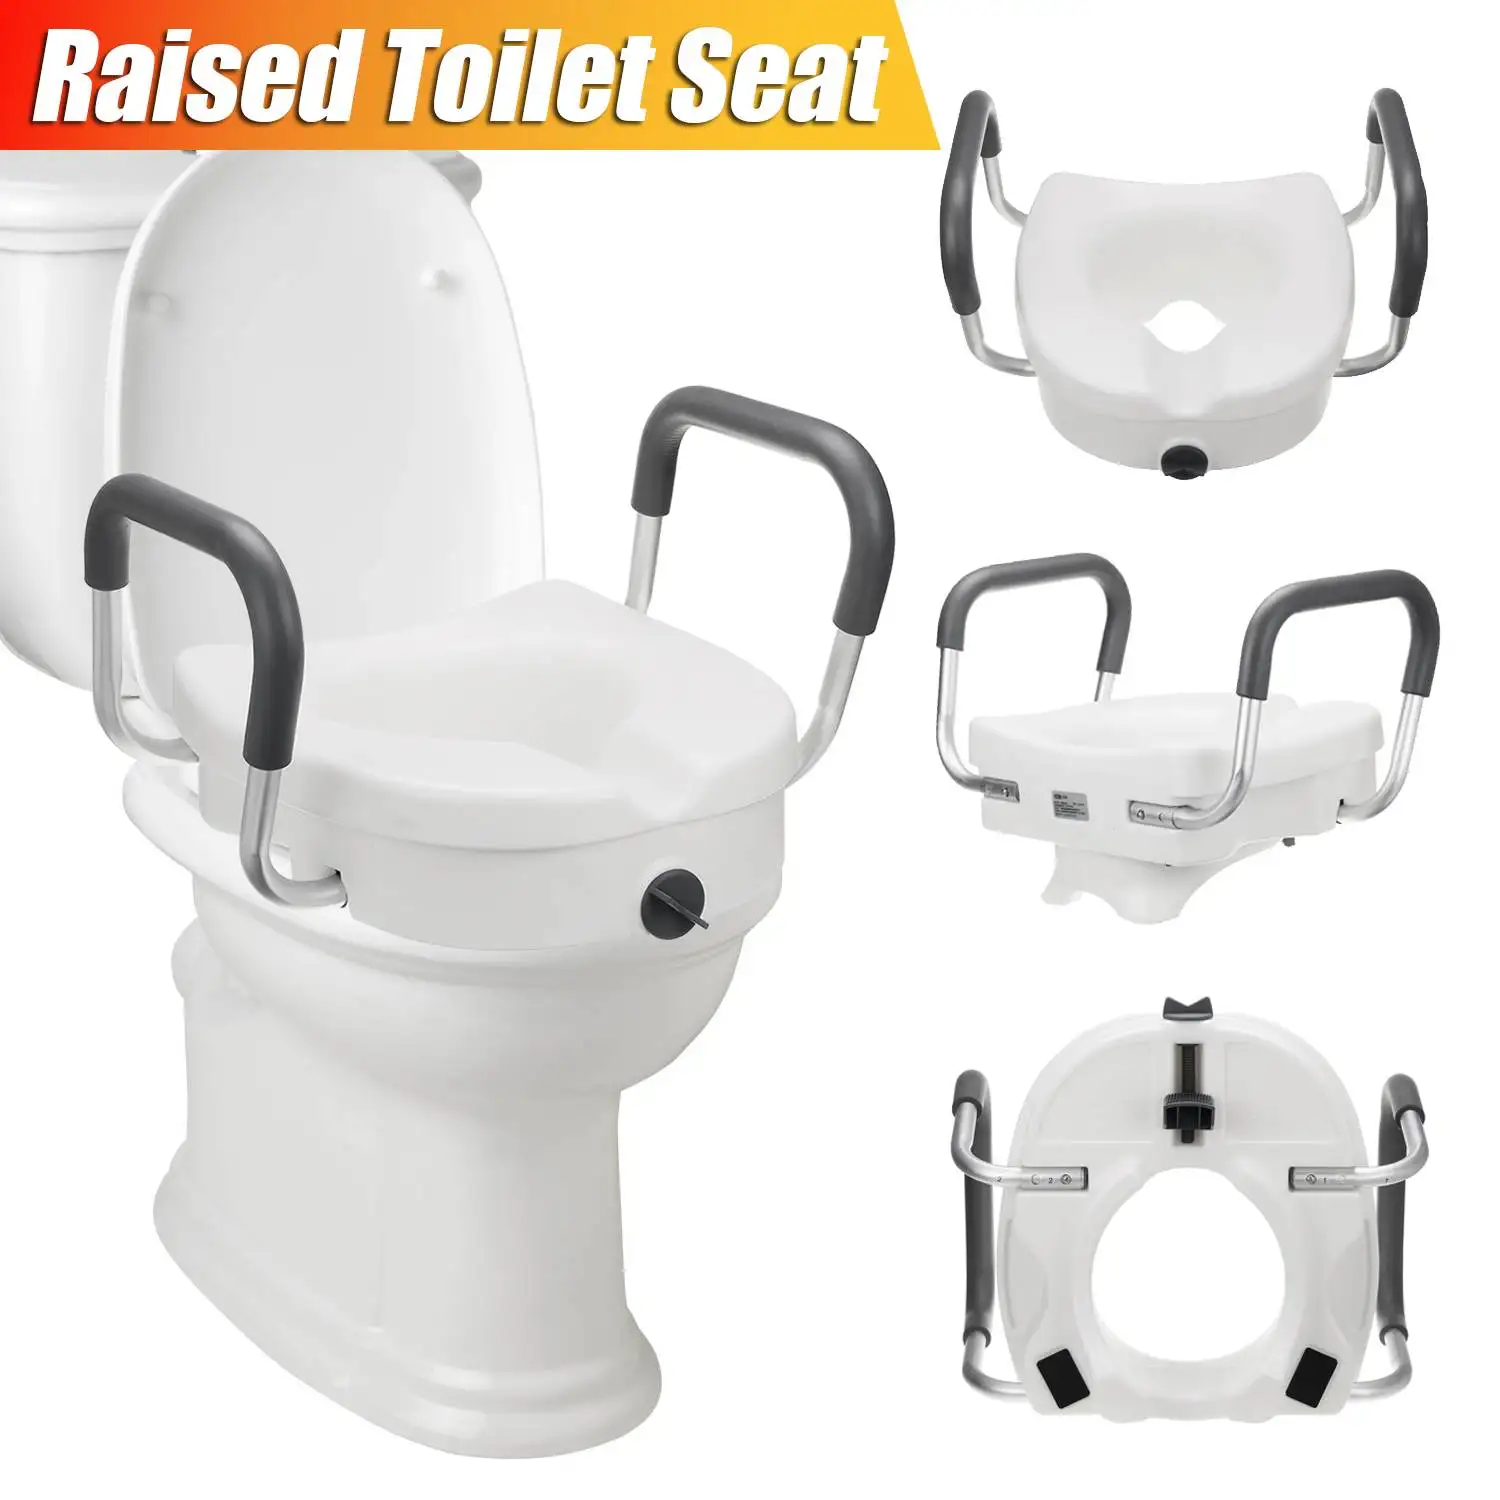 Removable Raised Toilet Seat With Arms Kansas City Mall Max 73% OFF Handles Disability Padded